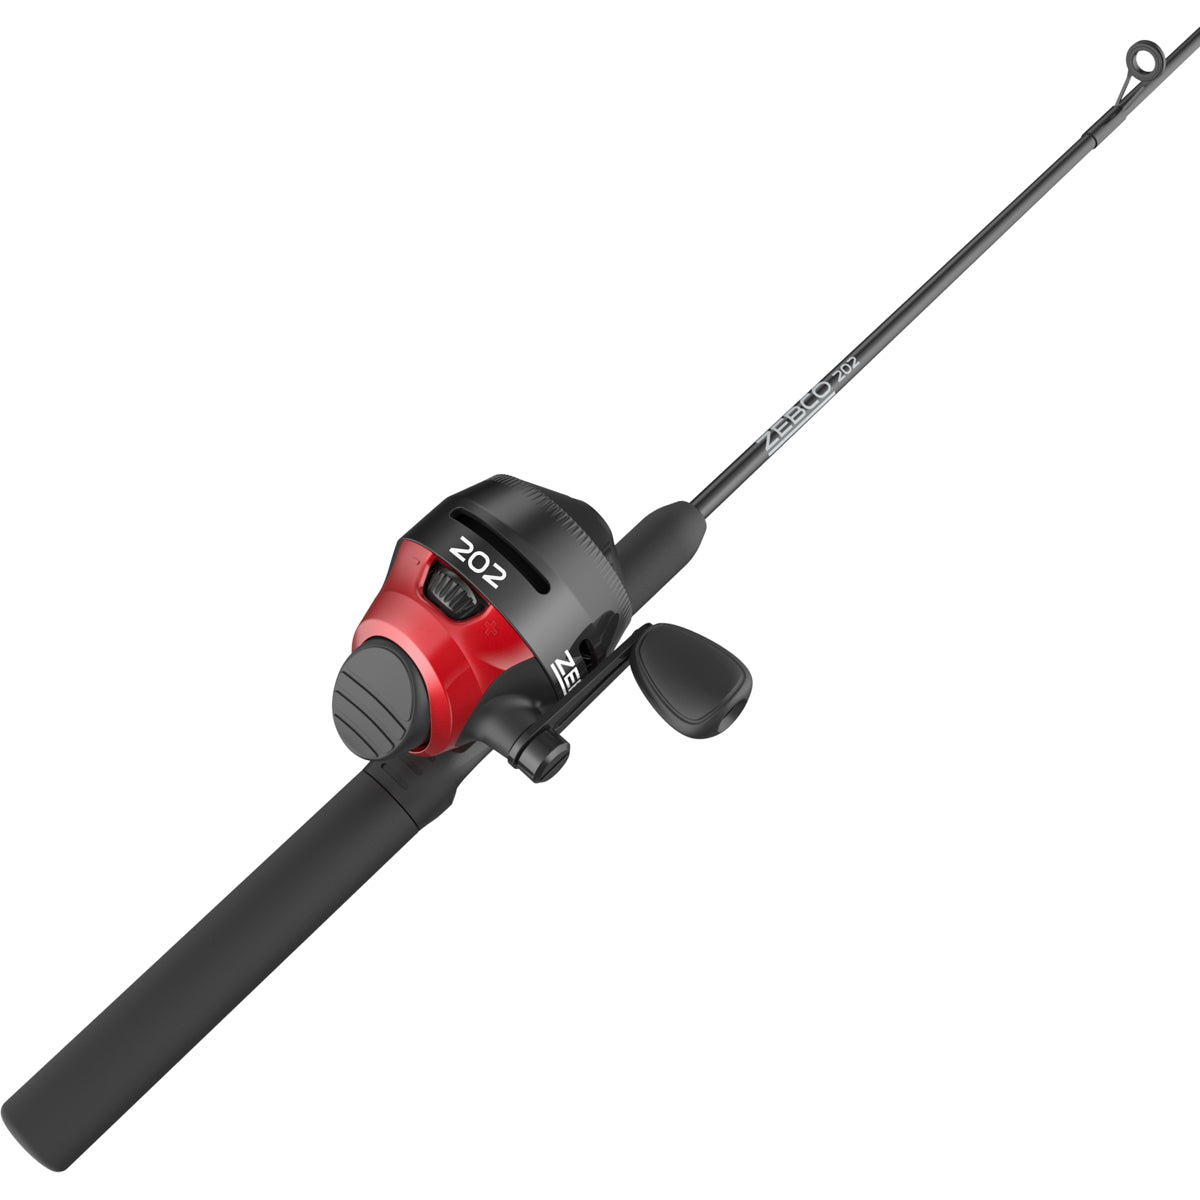 Photo of Zebco 202/562M Spincast Combo - Bulk for sale at United Tackle Shops.